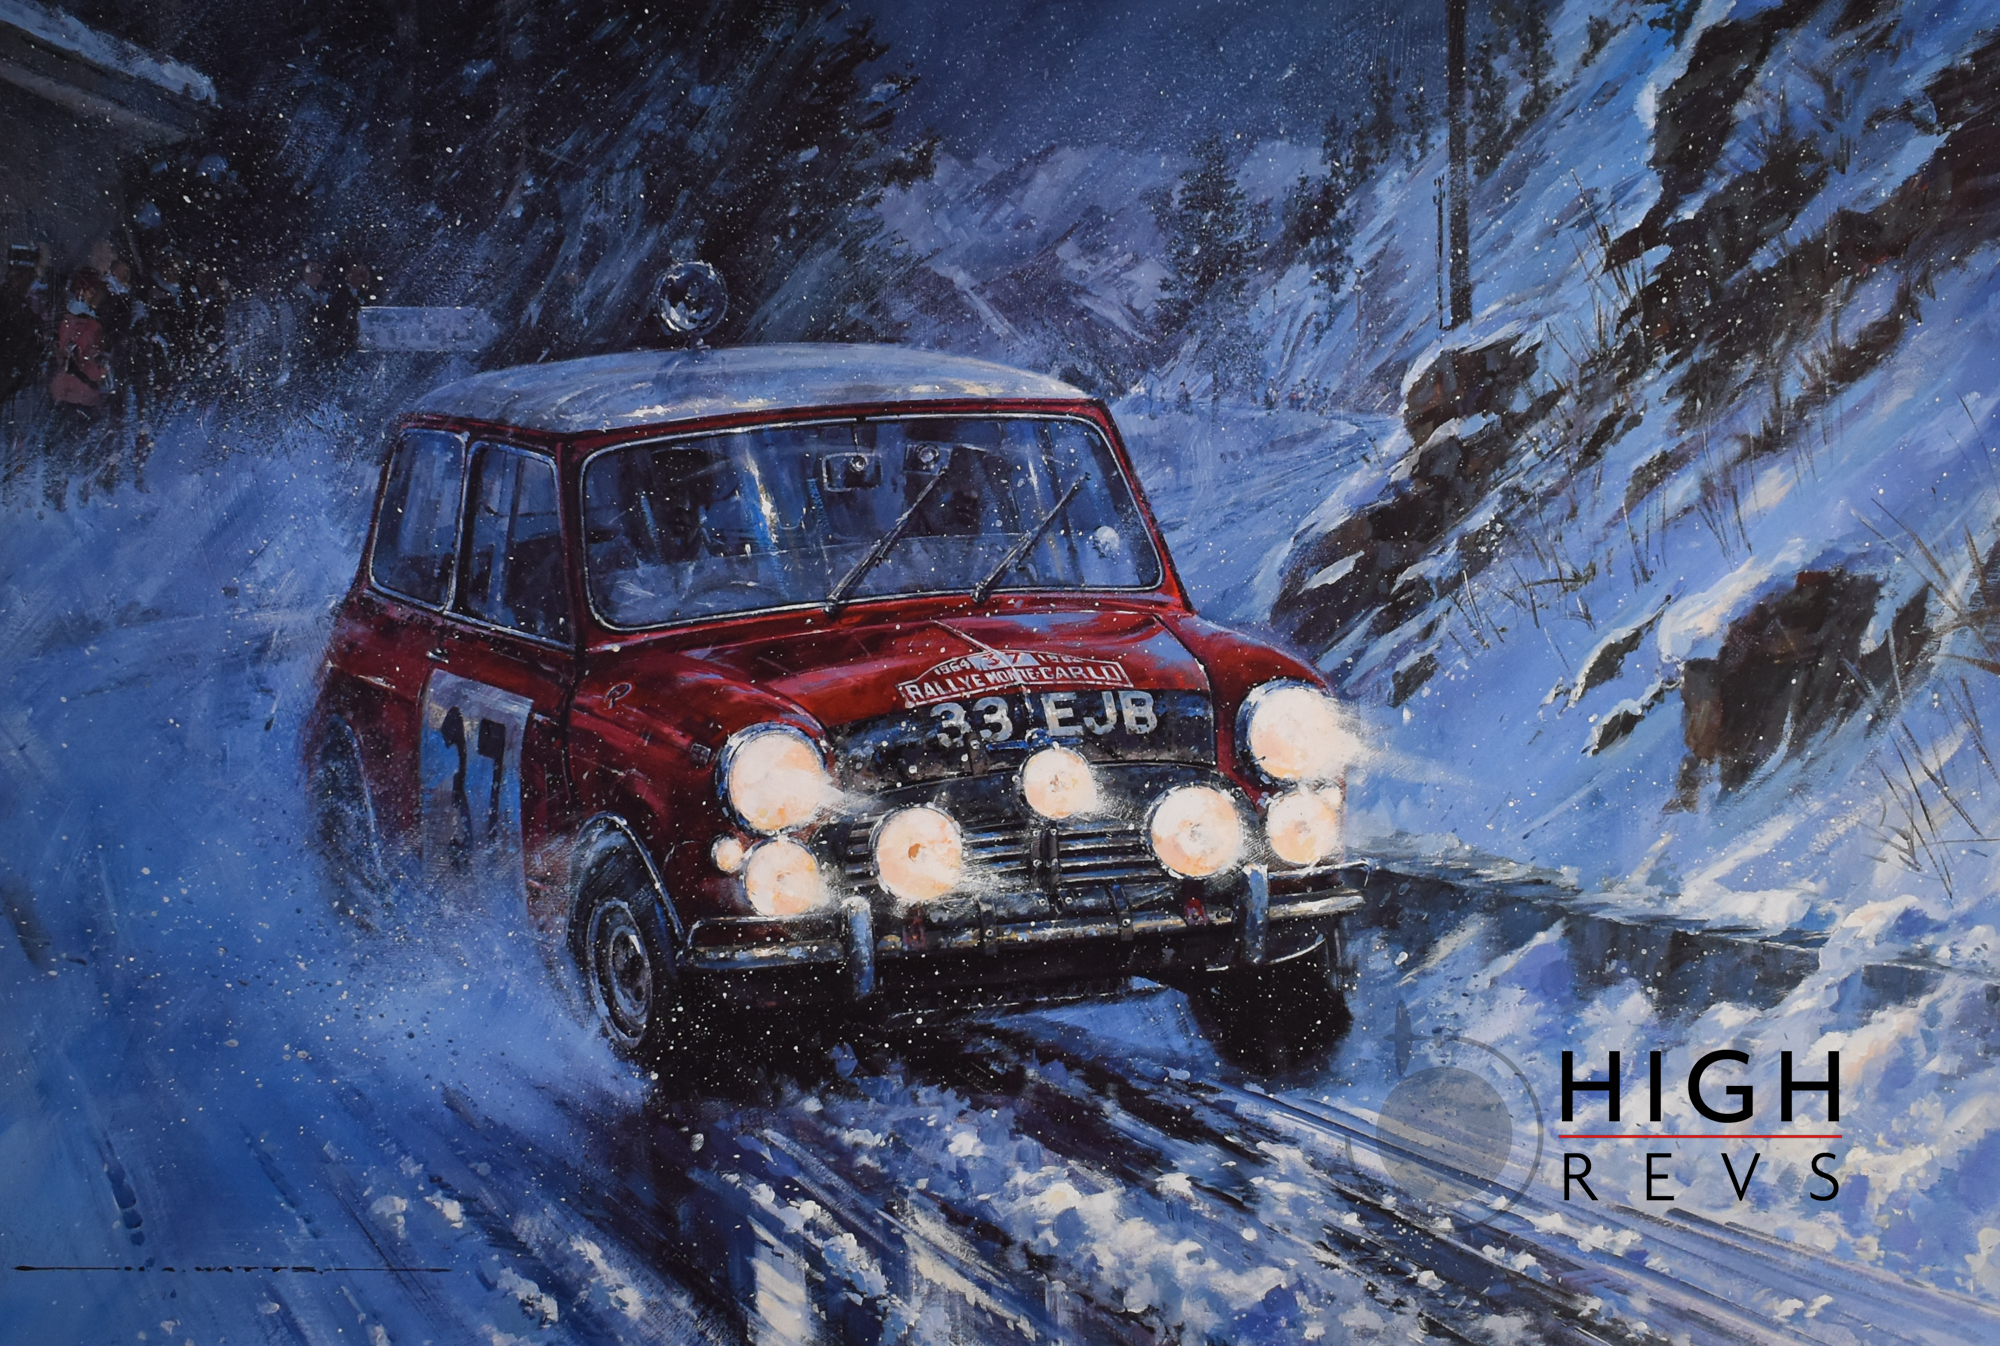 Paddy Hopkirk wins the monte carlo rally in his famous Mini Cooper S